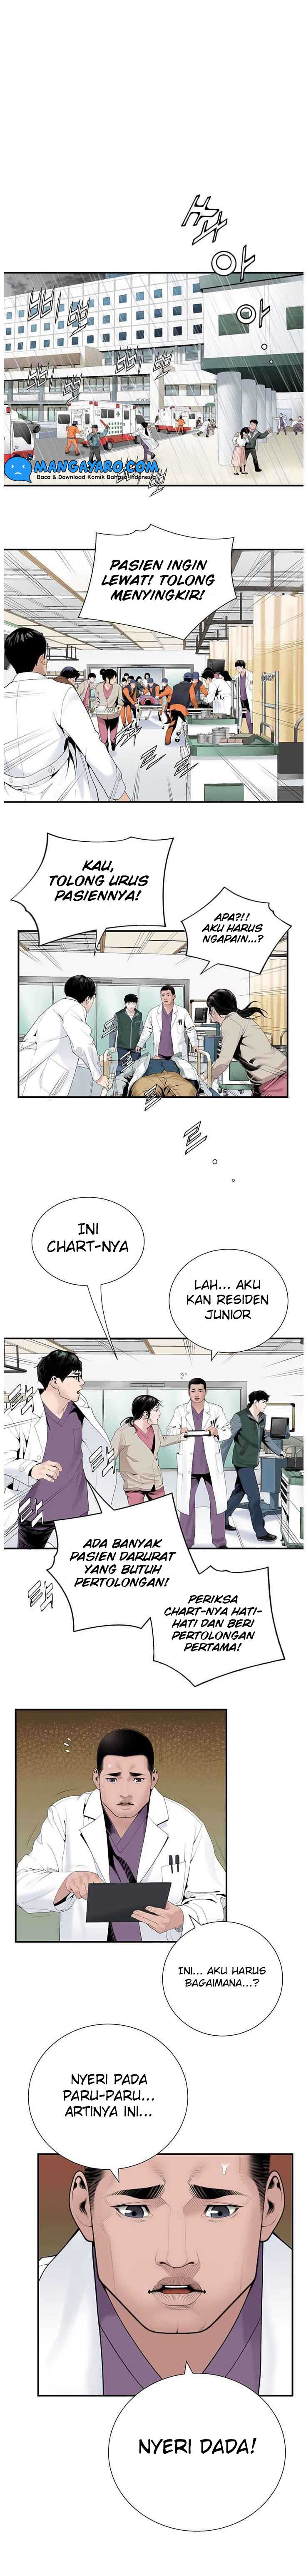 Dr. Choi Tae-Soo Chapter 19